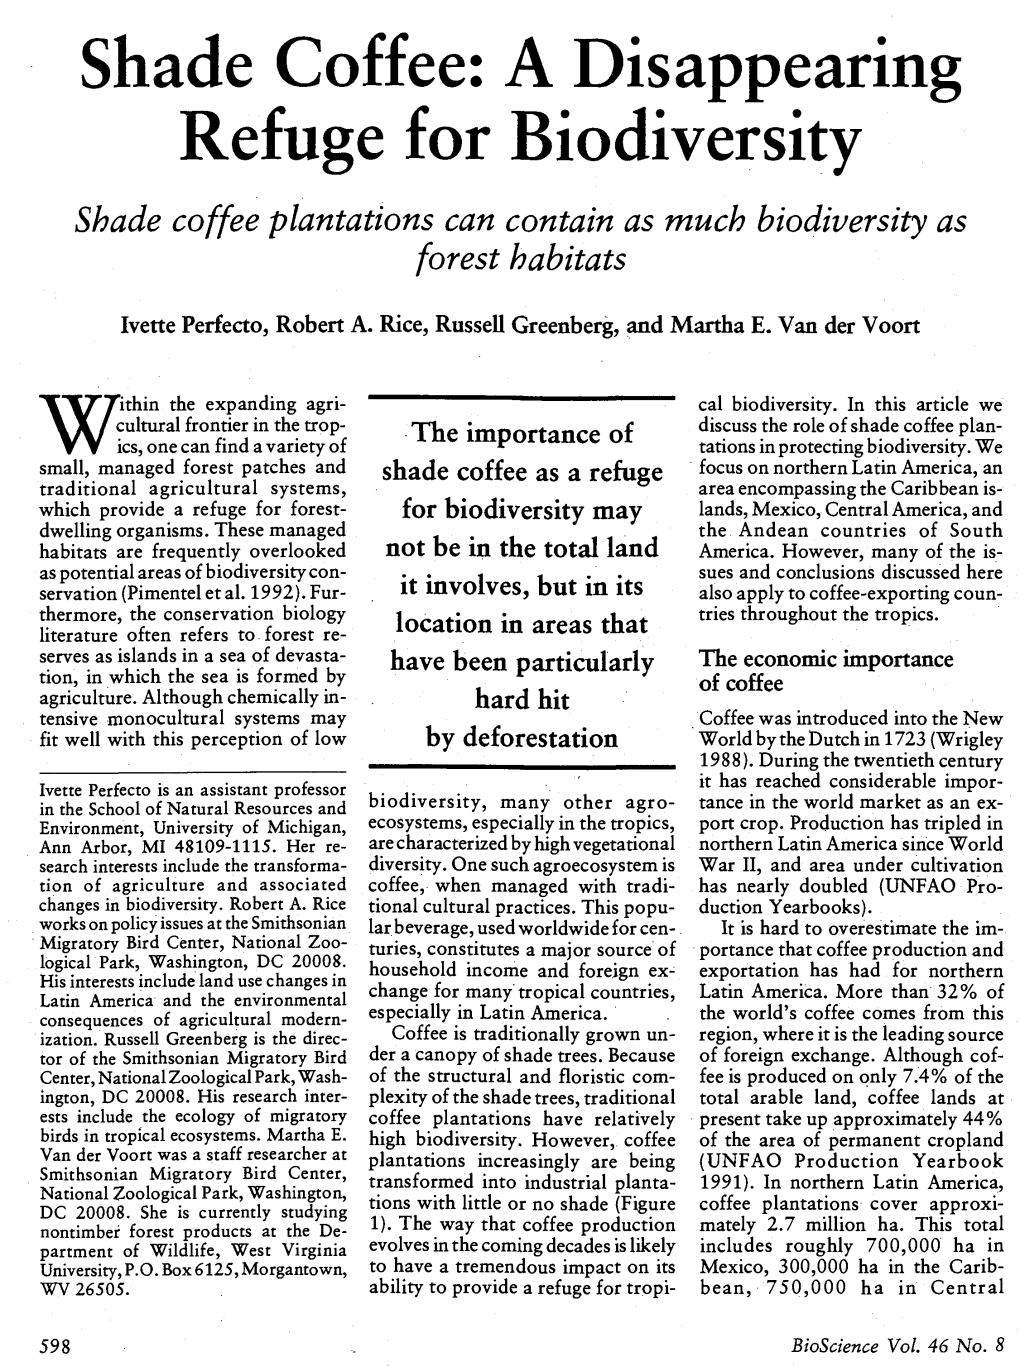 Shade Coffee: a Disappearing Refuge for Biodiversity Shade Coffee Plantations Can Contain As Much Biodiversity As Forest Habitats